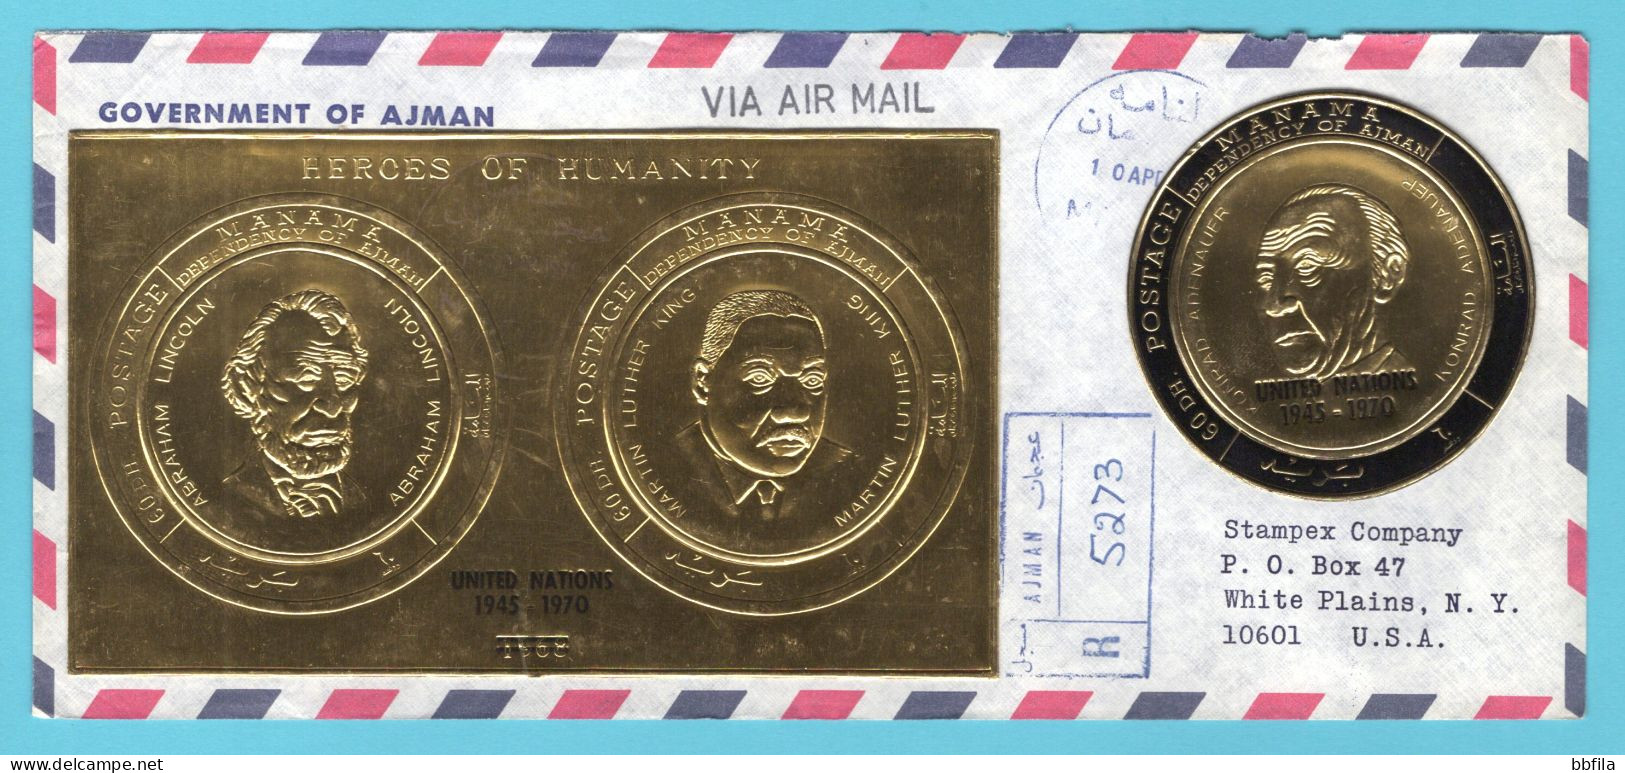 UNITED ARAB EMIRATES MANAMA R Cover 1970 Ajman With Gold Lincoln And Luther King UN Miniature Sheet + Audenauer - Manama